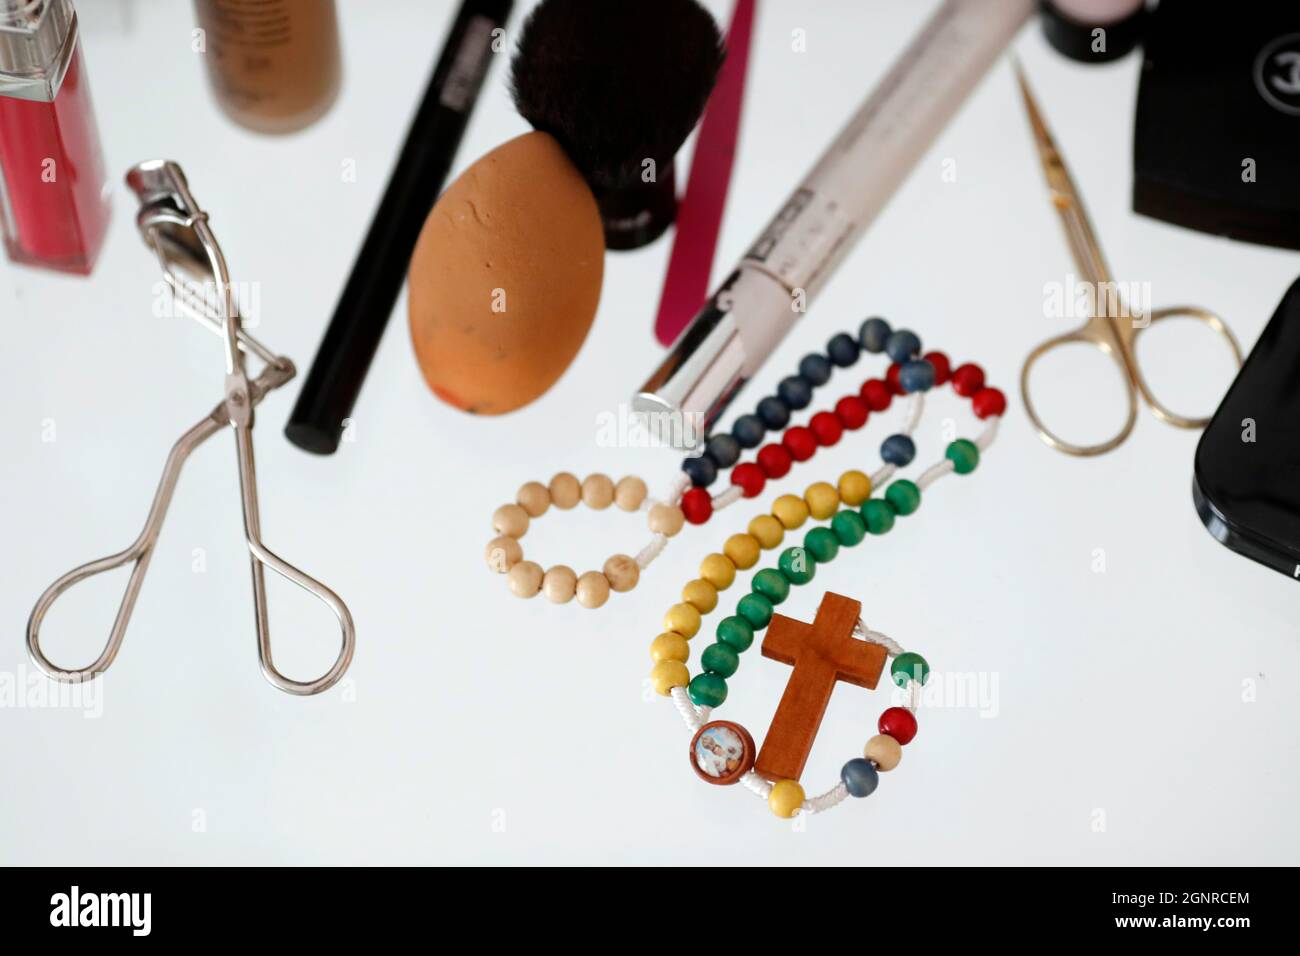 Makeup products and prayer beads on table. Stock Photo